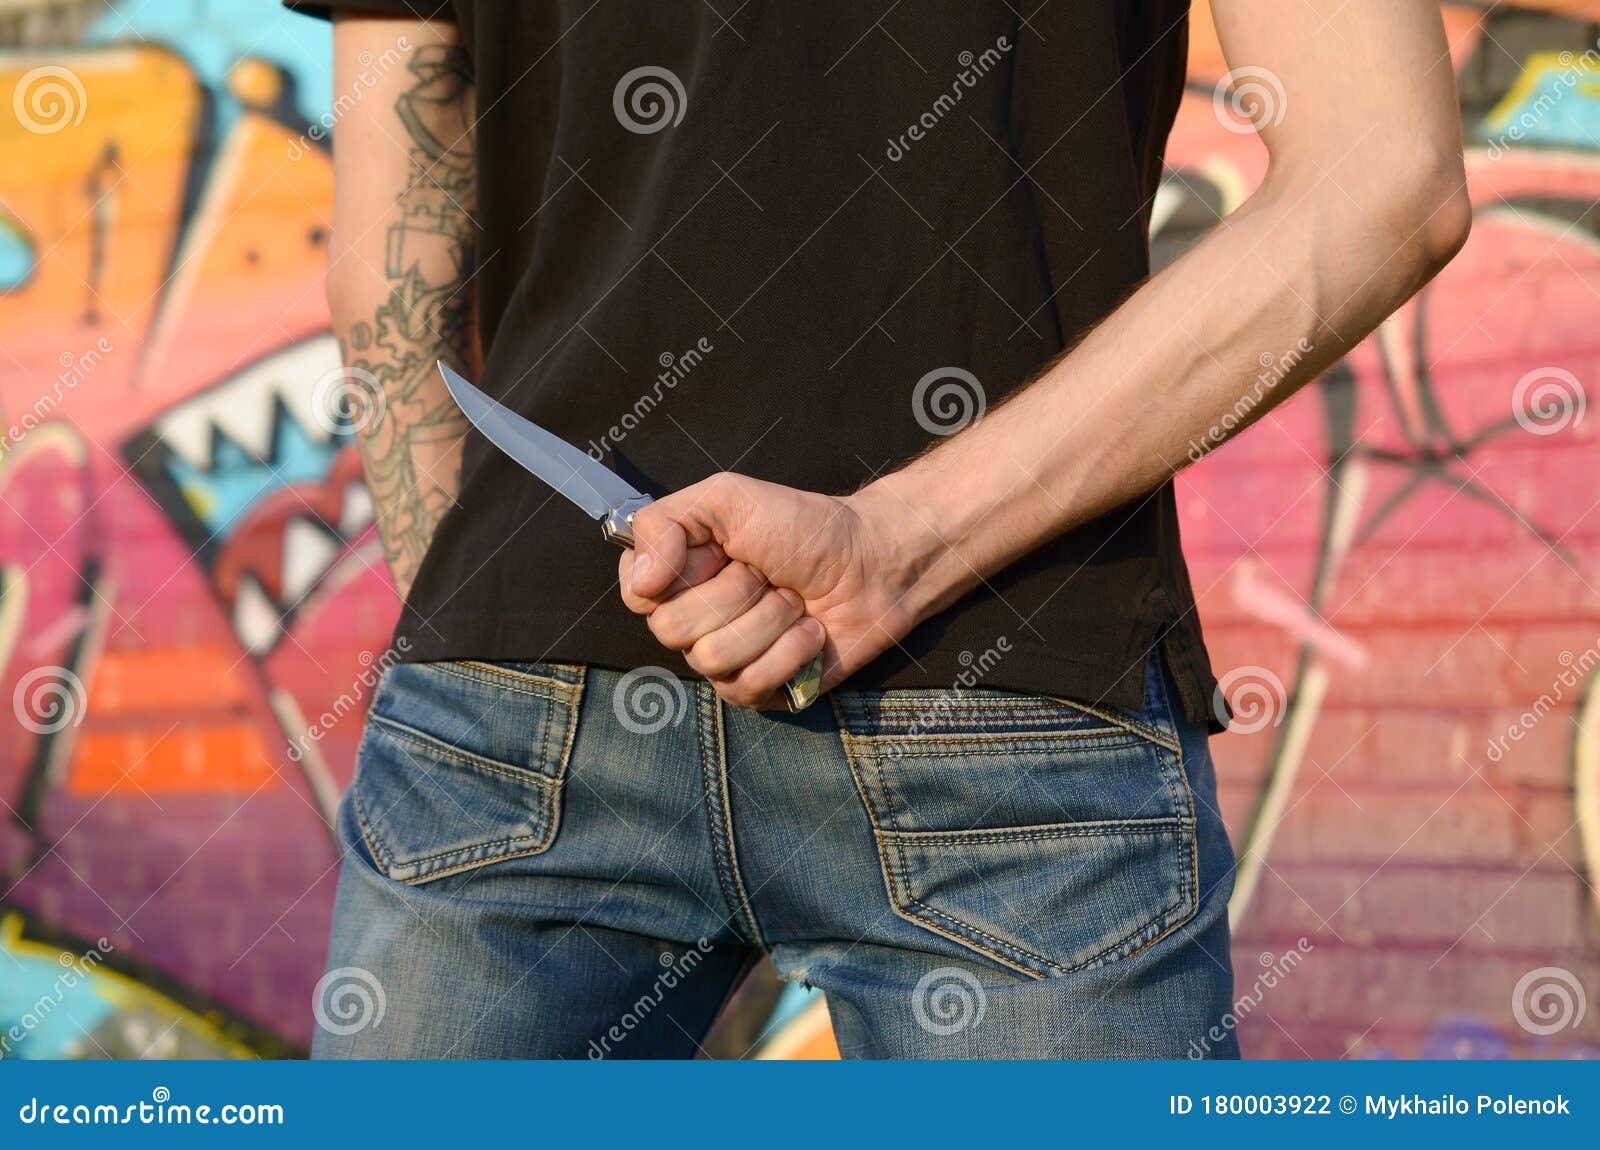 back view of young caucasian man with knife in his hand against ghetto brick wall with graffiti paintings. concept of criminal